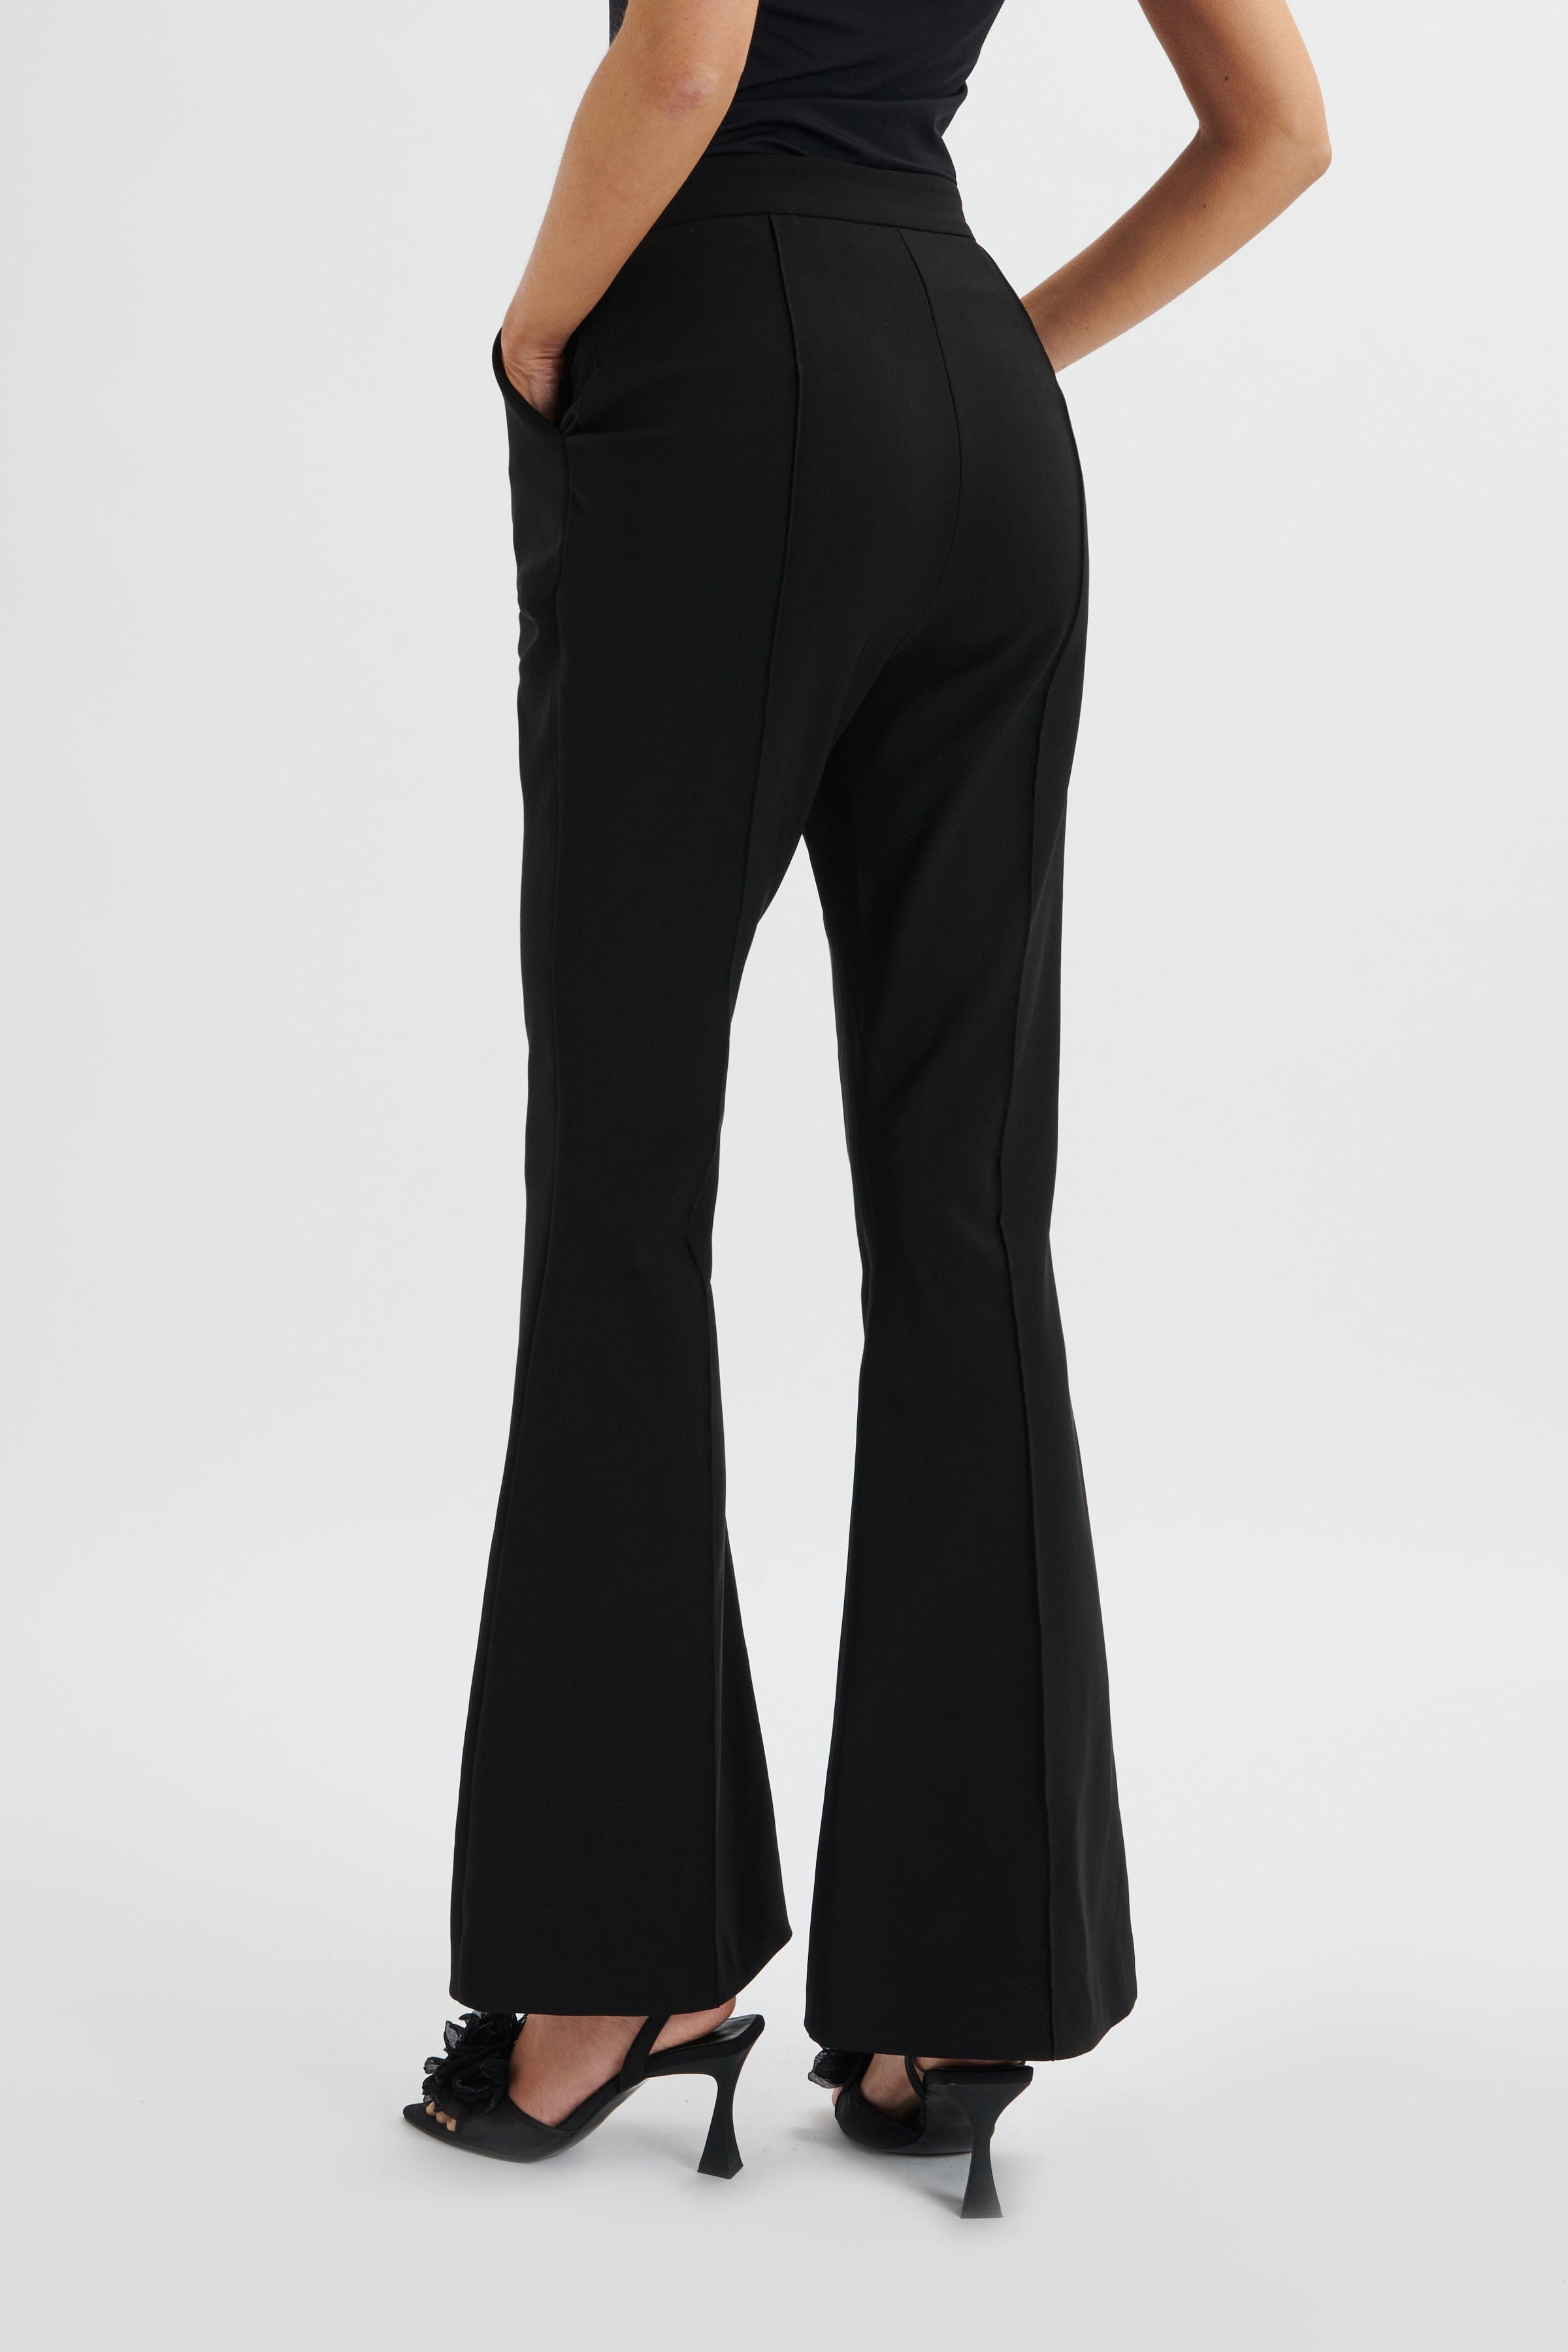 EMELIE Fit & Flare Tailored Trouser In Black